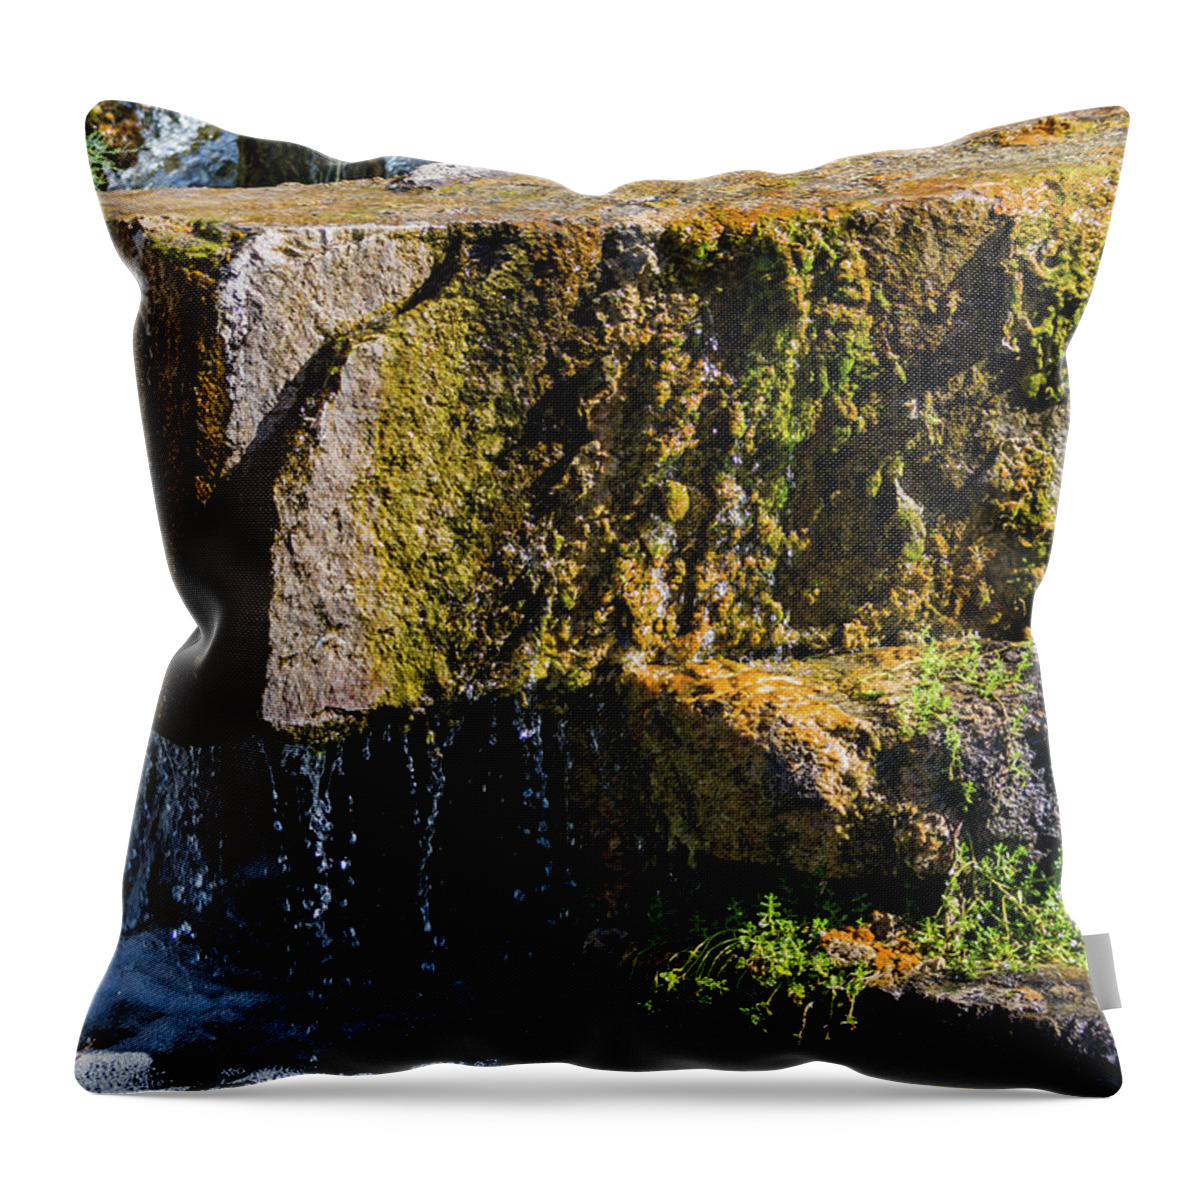 Waterfall Throw Pillow featuring the photograph Desert Waterfall 2 by Douglas Killourie